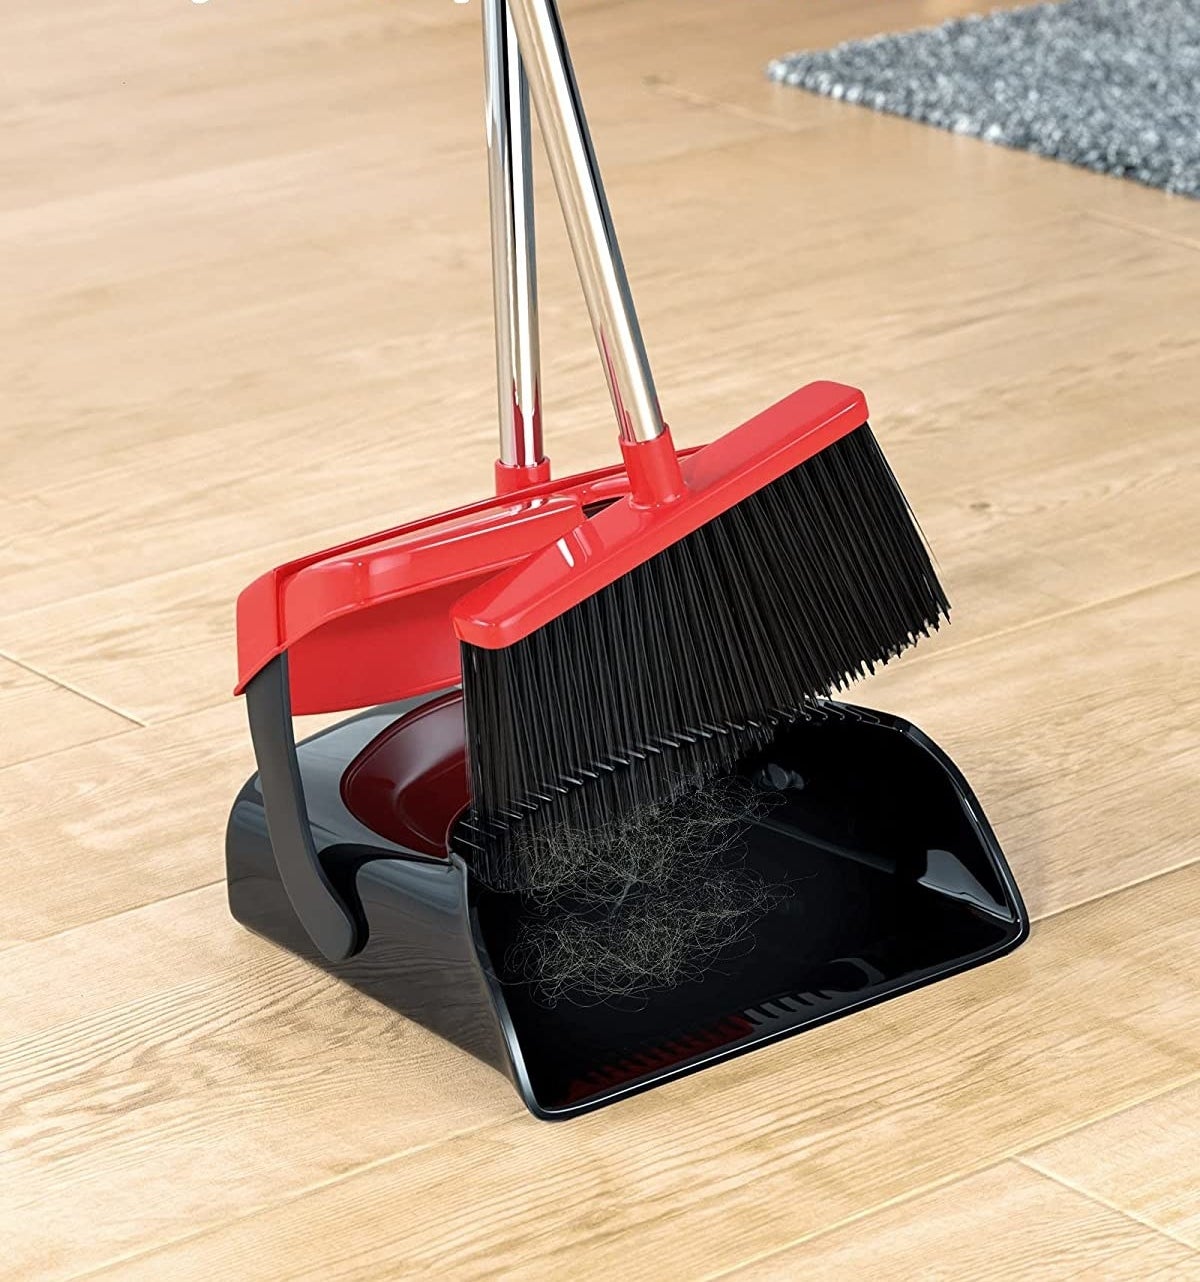 An upright broom and dustpan where the dustpan has dirt-removing teeth around the rim